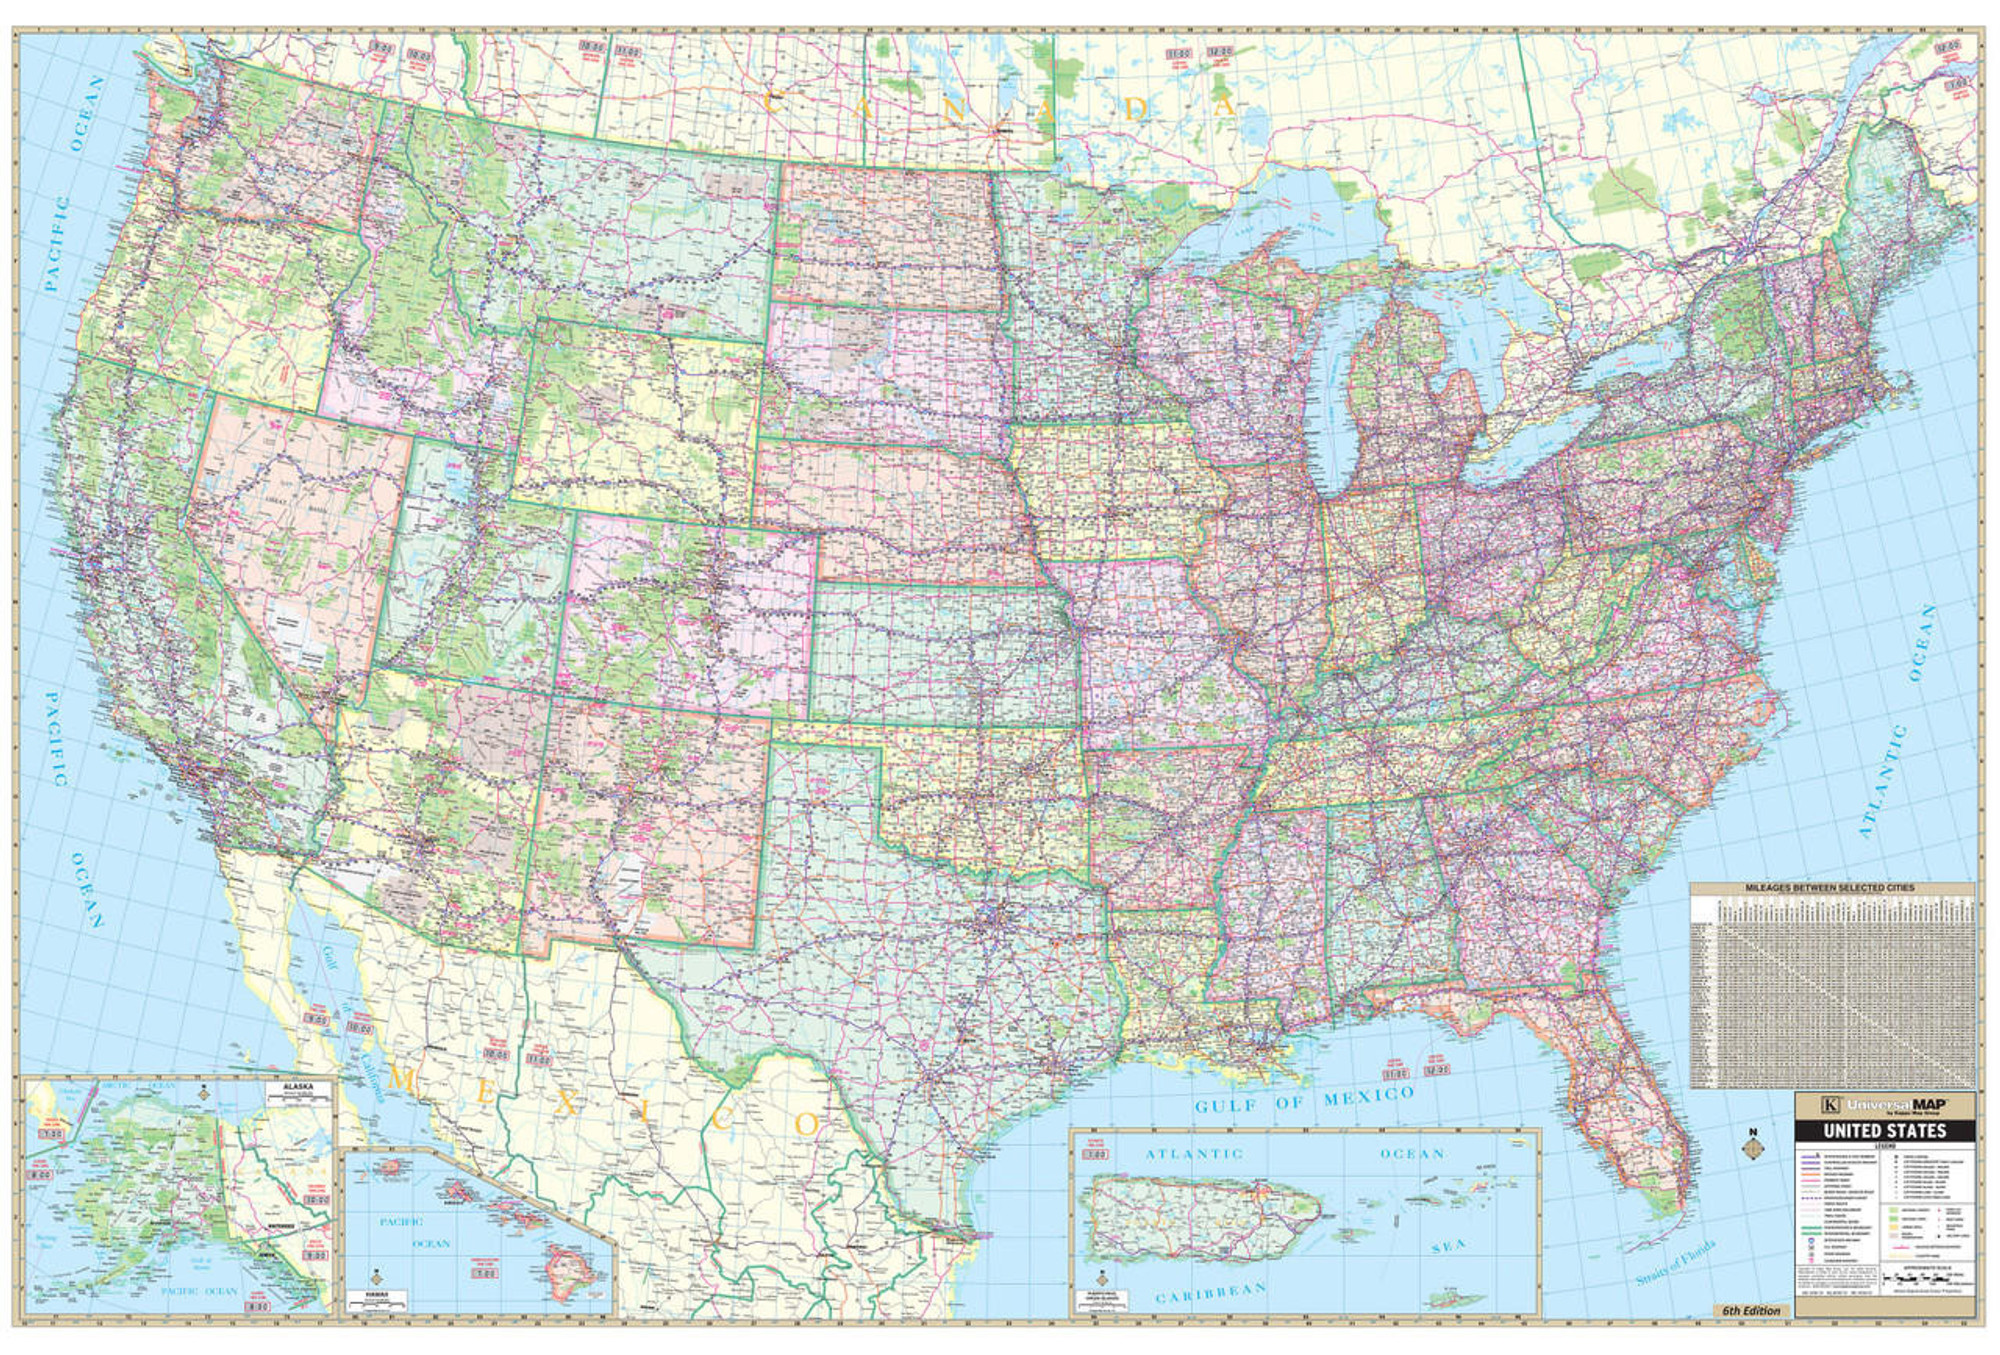 Enlarged Laminated Wall Mural Size USA Reference Map - 77" x 51", image 1, World Maps Online